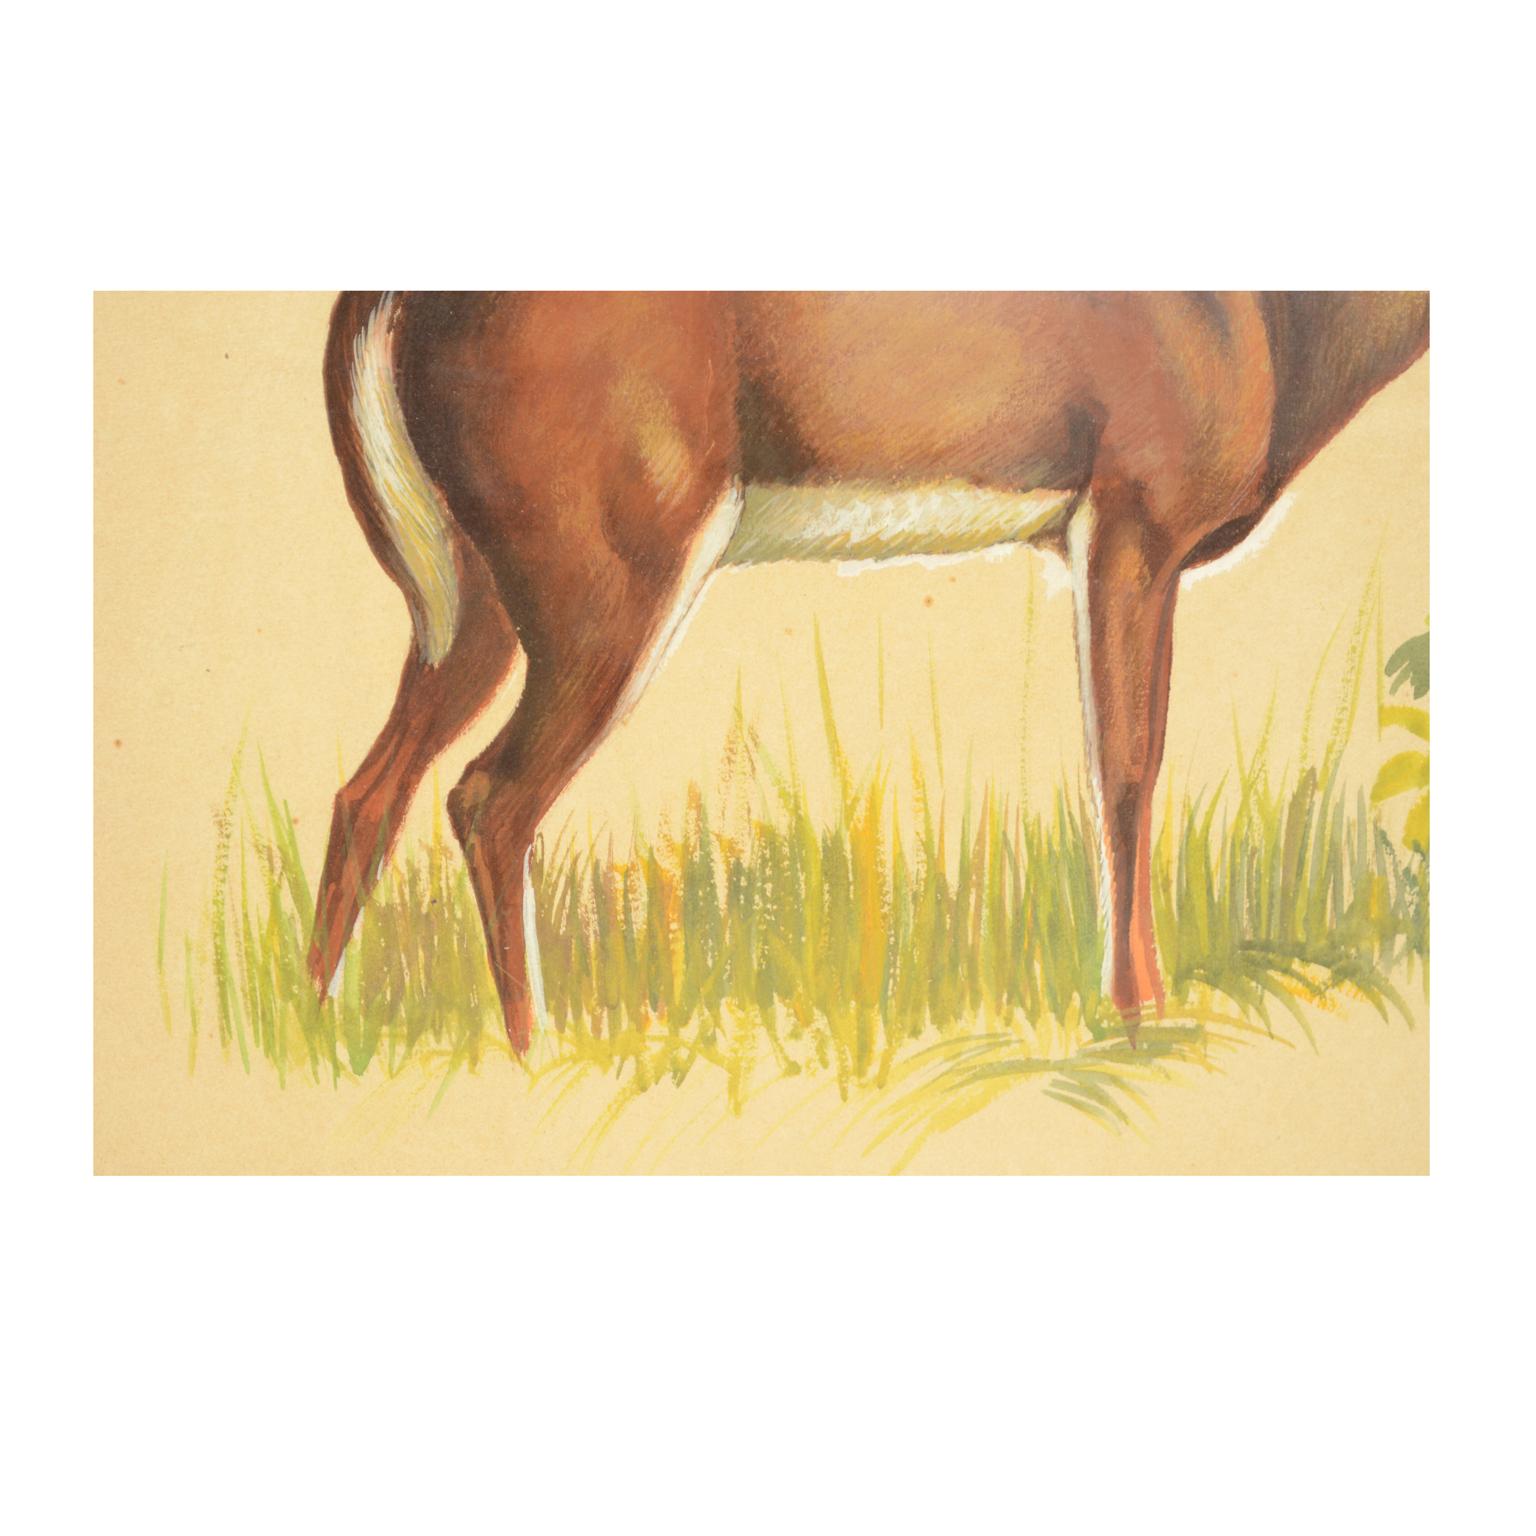 Korean Sketch of a hind Korea 1970s Acrylic on Paper for an Animals Encyclopedia For Sale